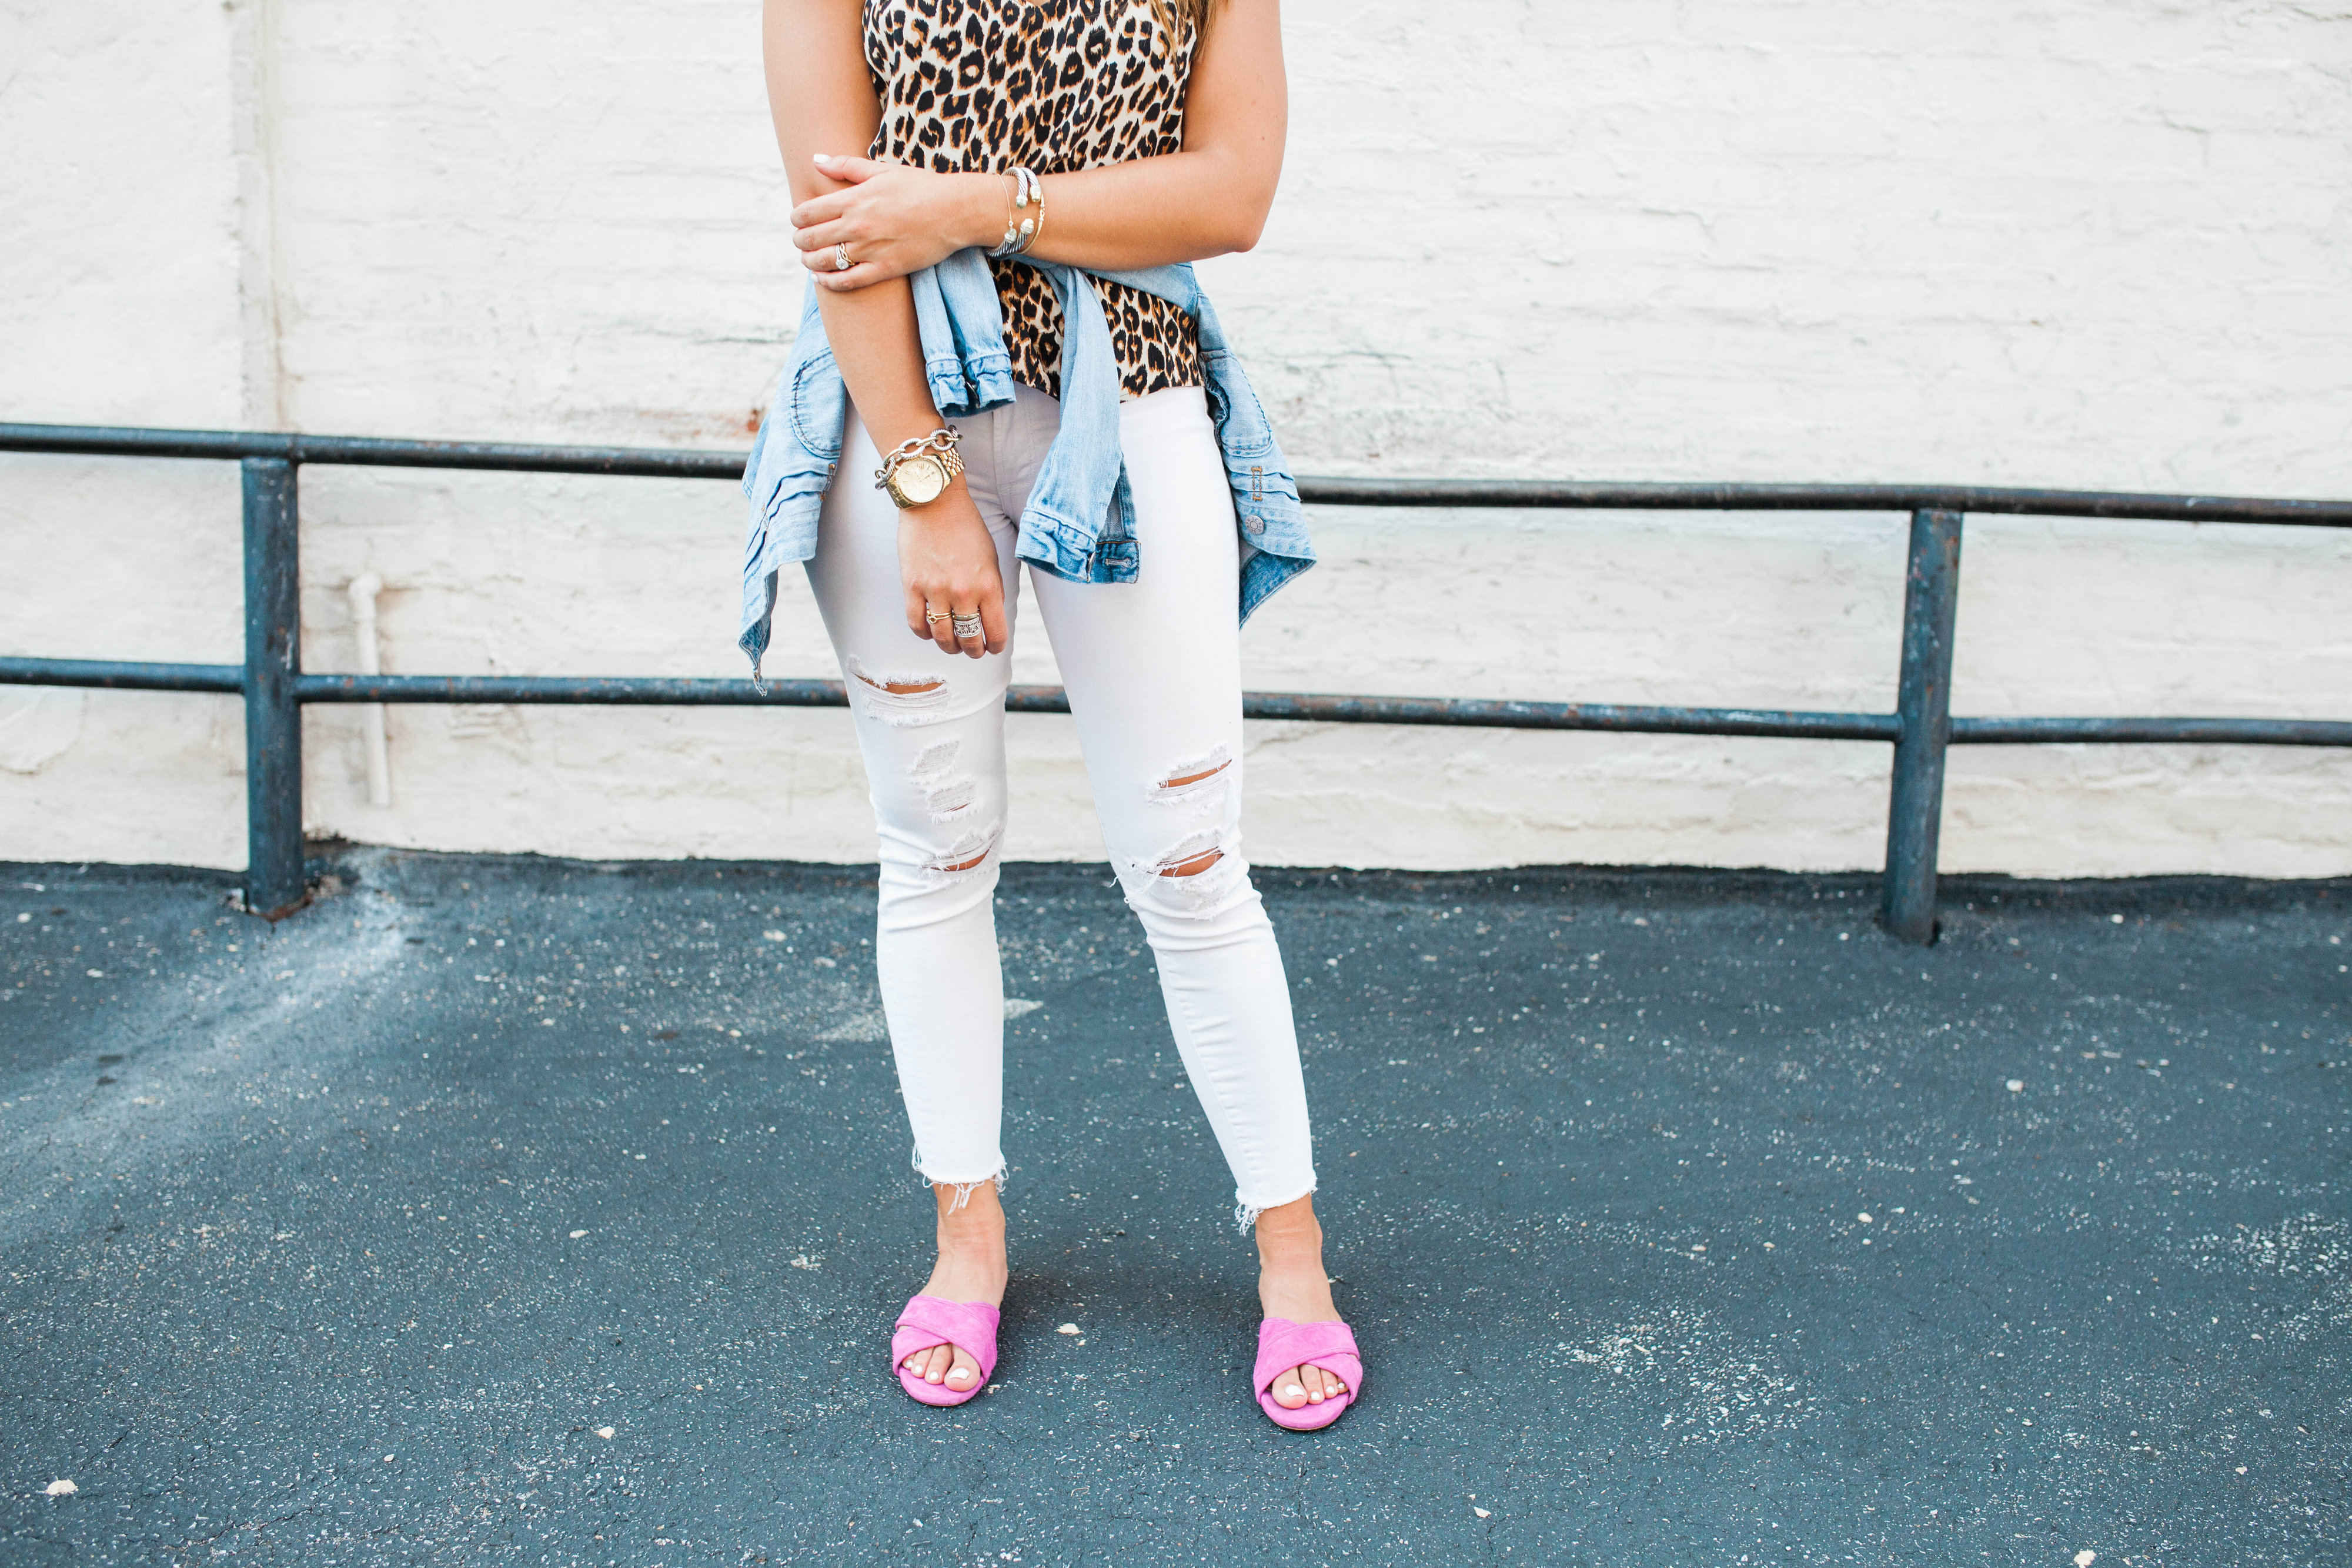 How to style a leopard cami